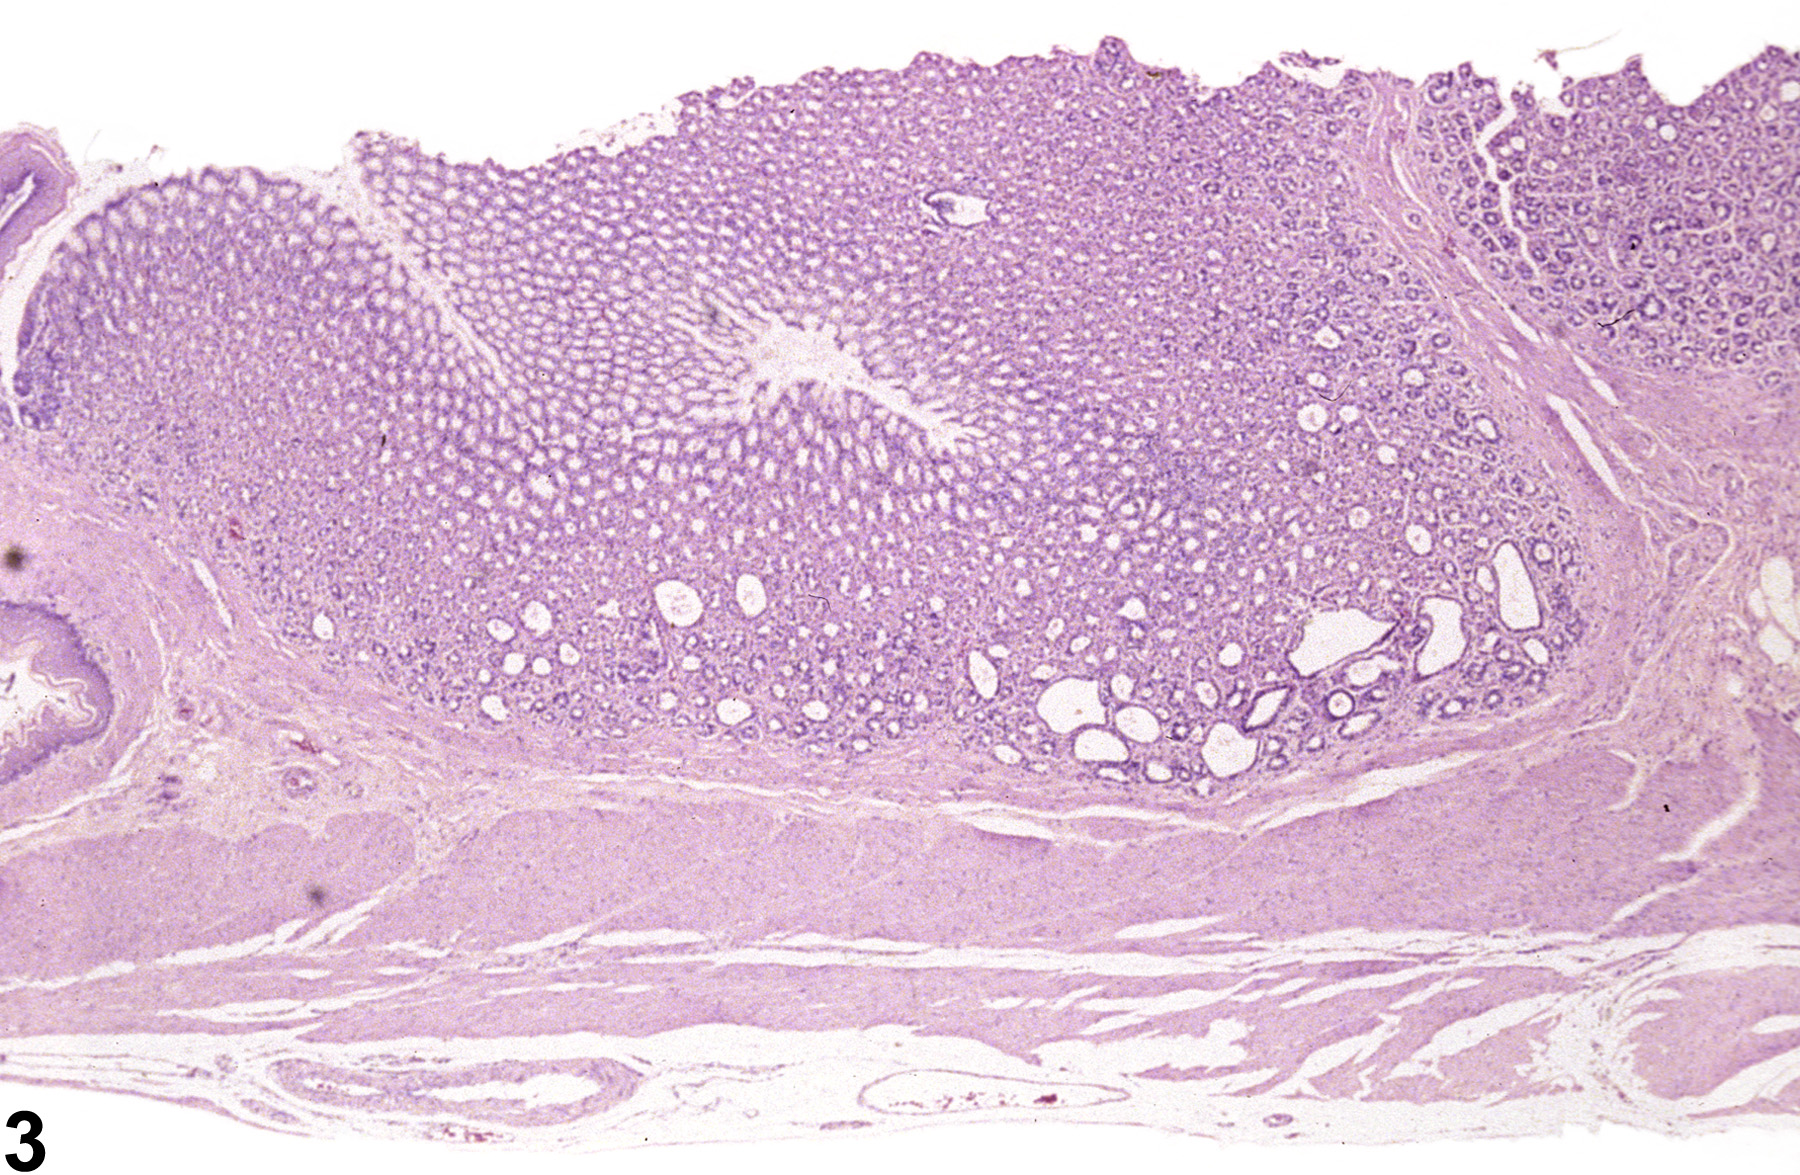 Image of dilation in the glandular stomach glands from a female F344/N rat in a chronic study